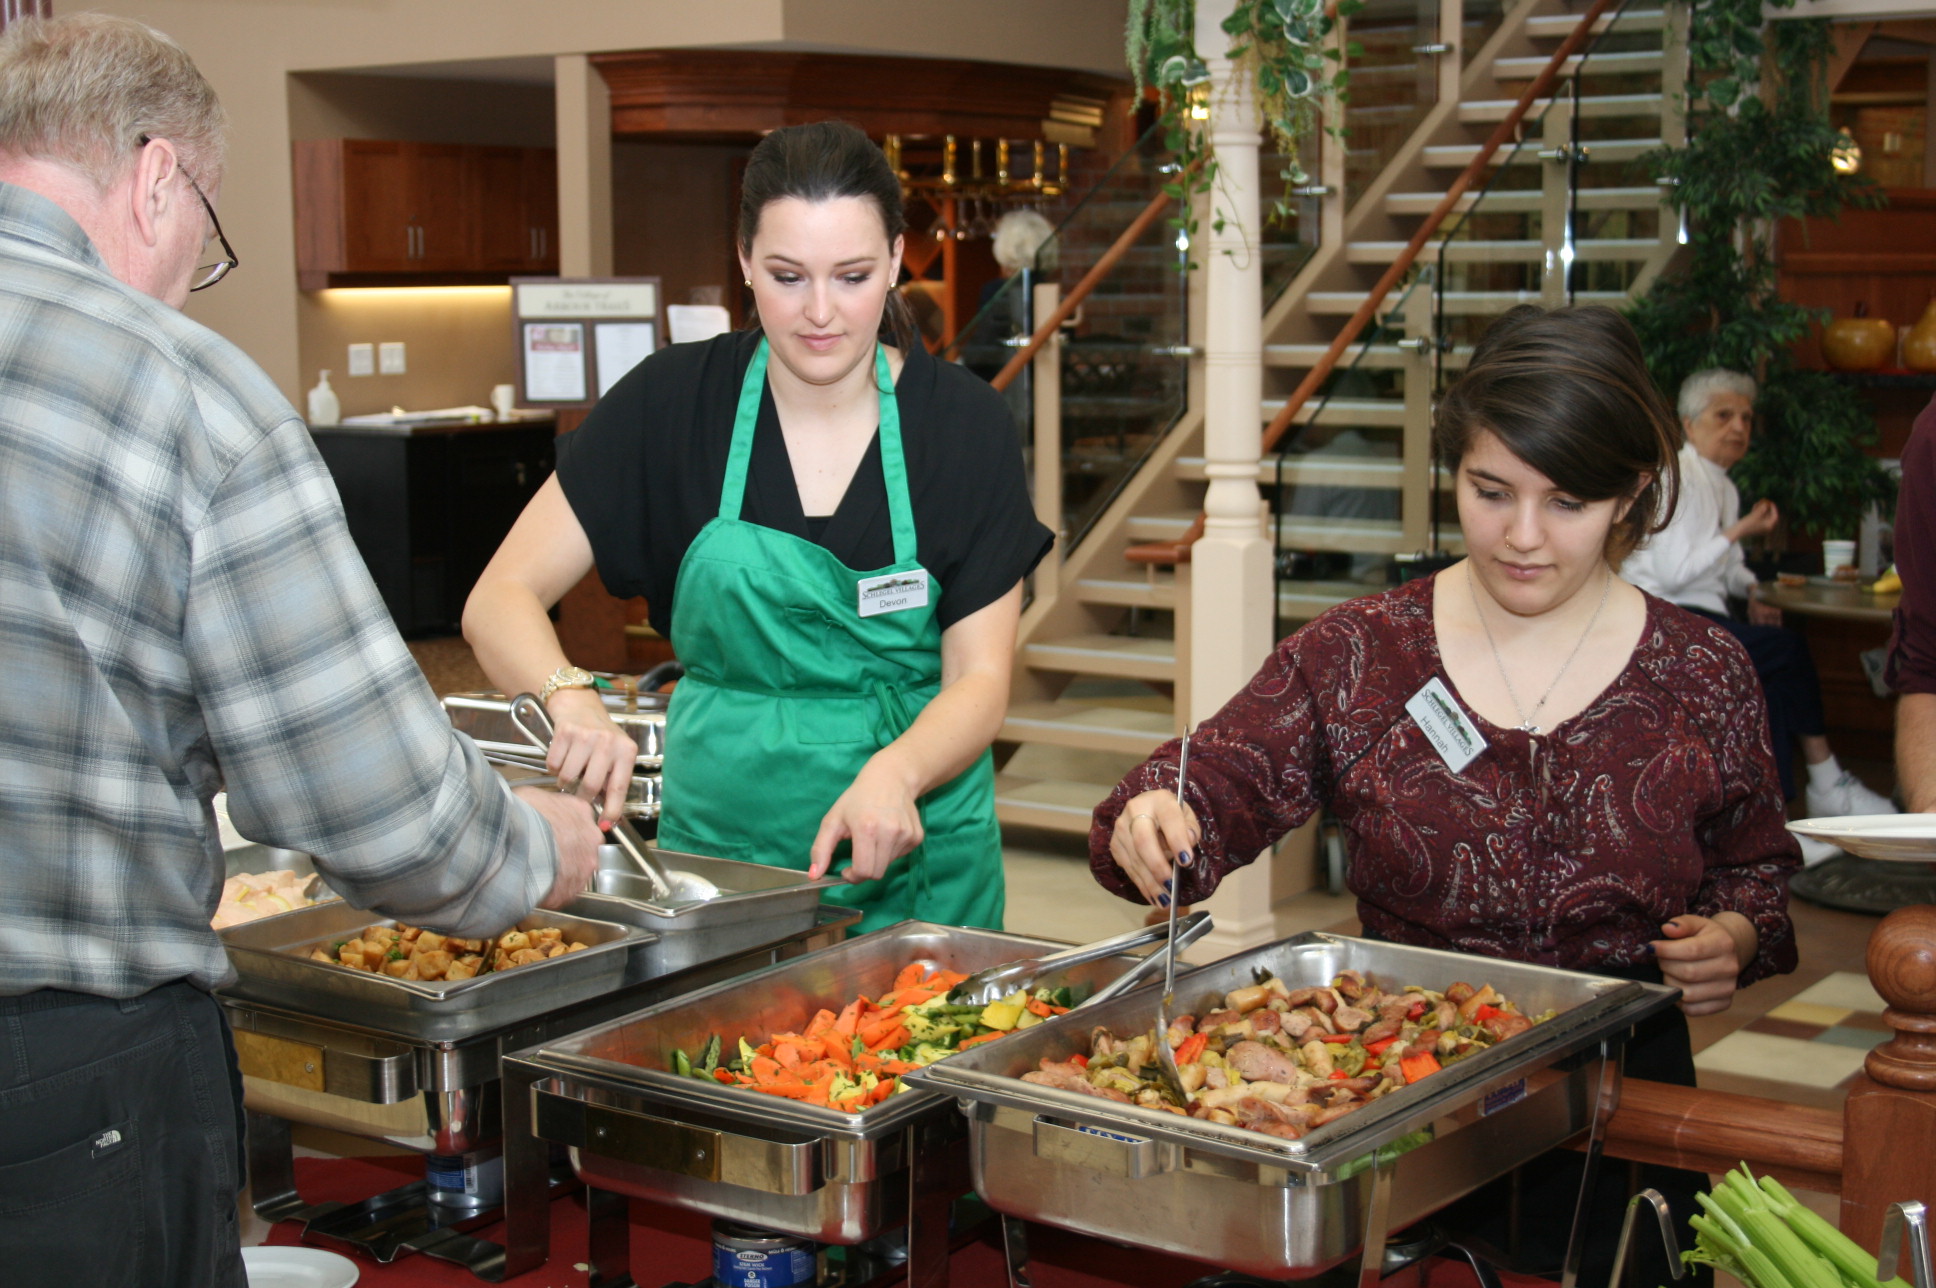 Food service team members serve a special meal at the Village